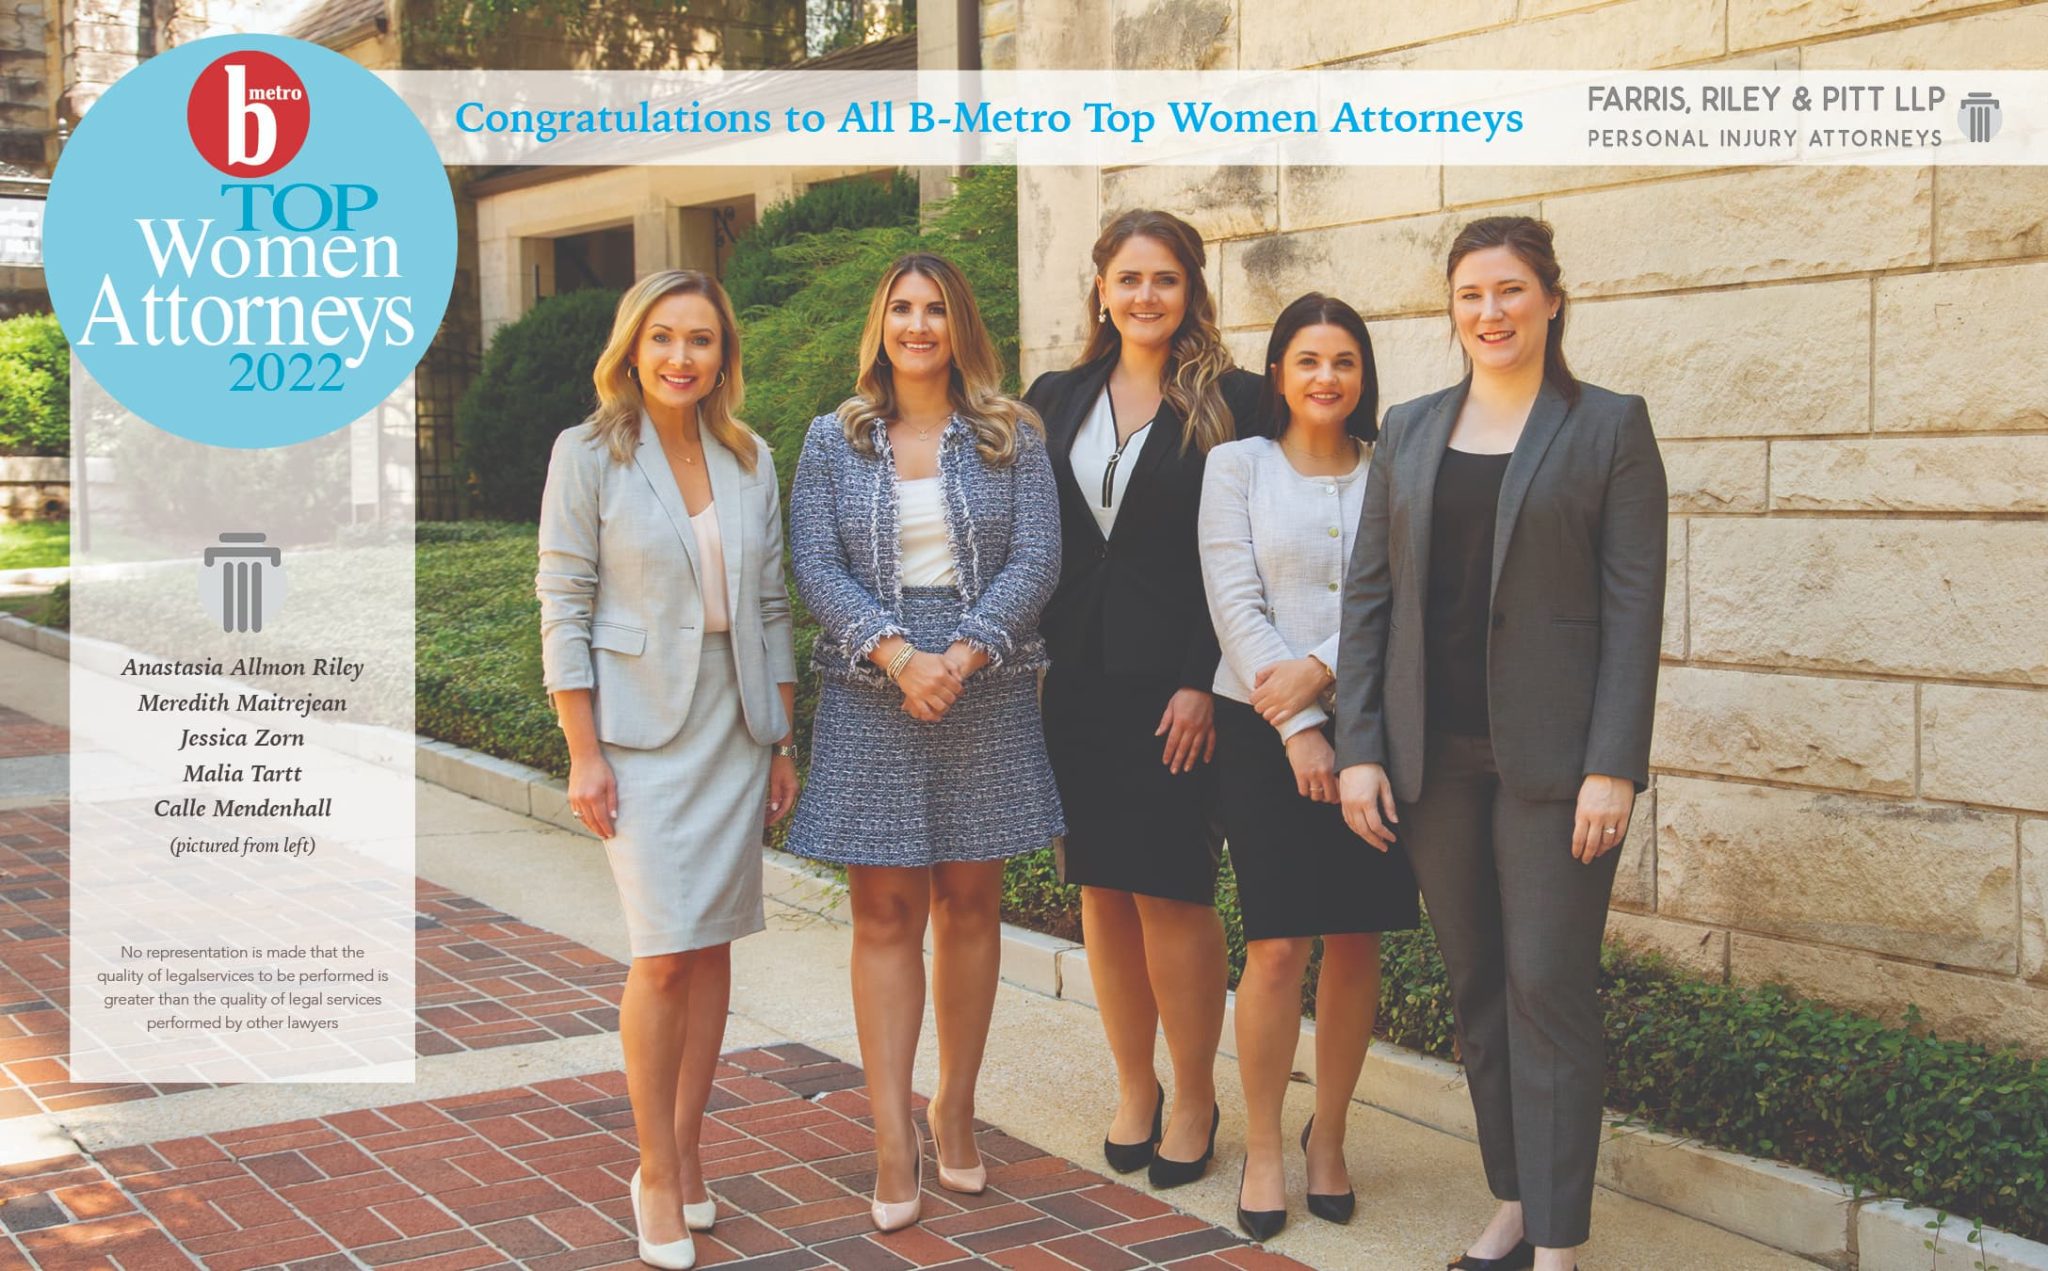 All FRP Female Attorneys Named Top Women Attorneys by B-Metro Magazine